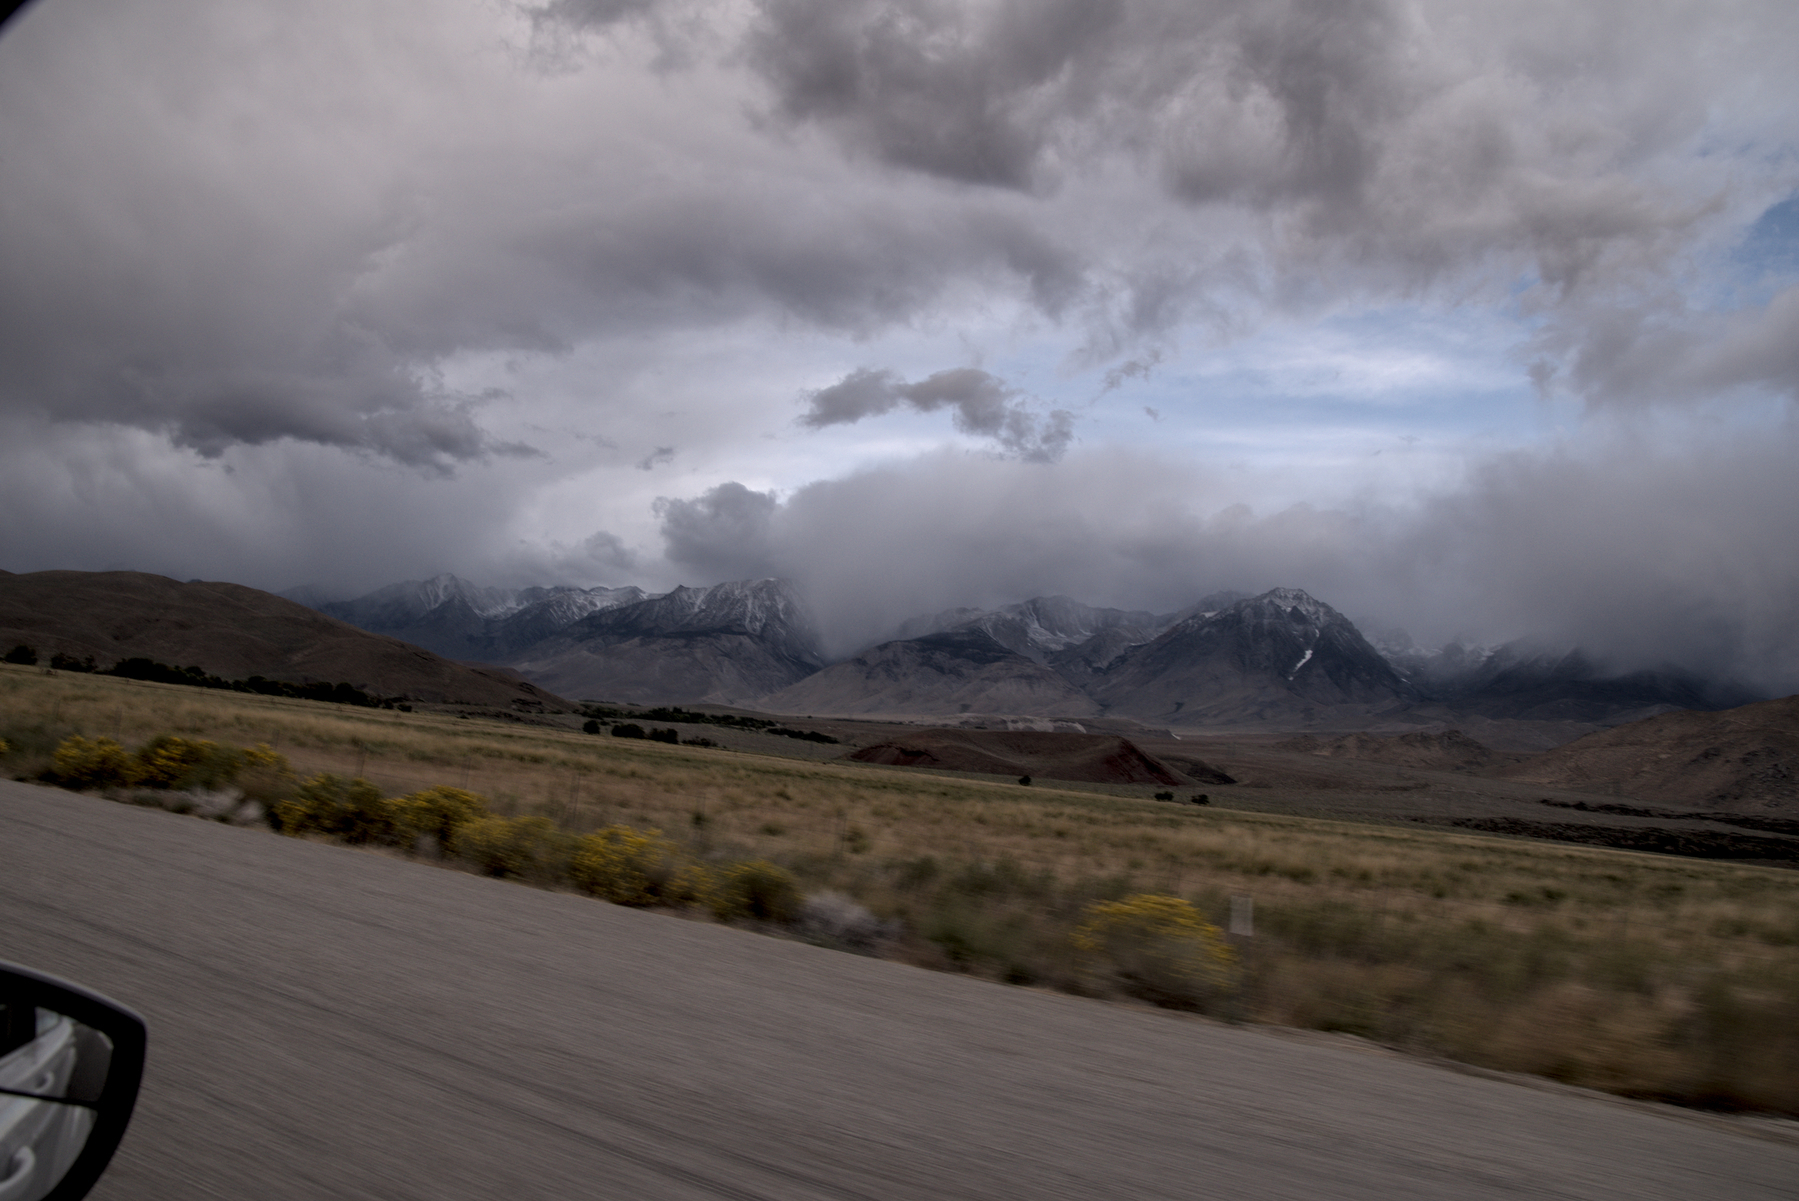 Mountains under a snowstorm, above a grassy plain, are captured from a car window.  The image is titled, a finger obscures part of the frame, the roadway is blurred.